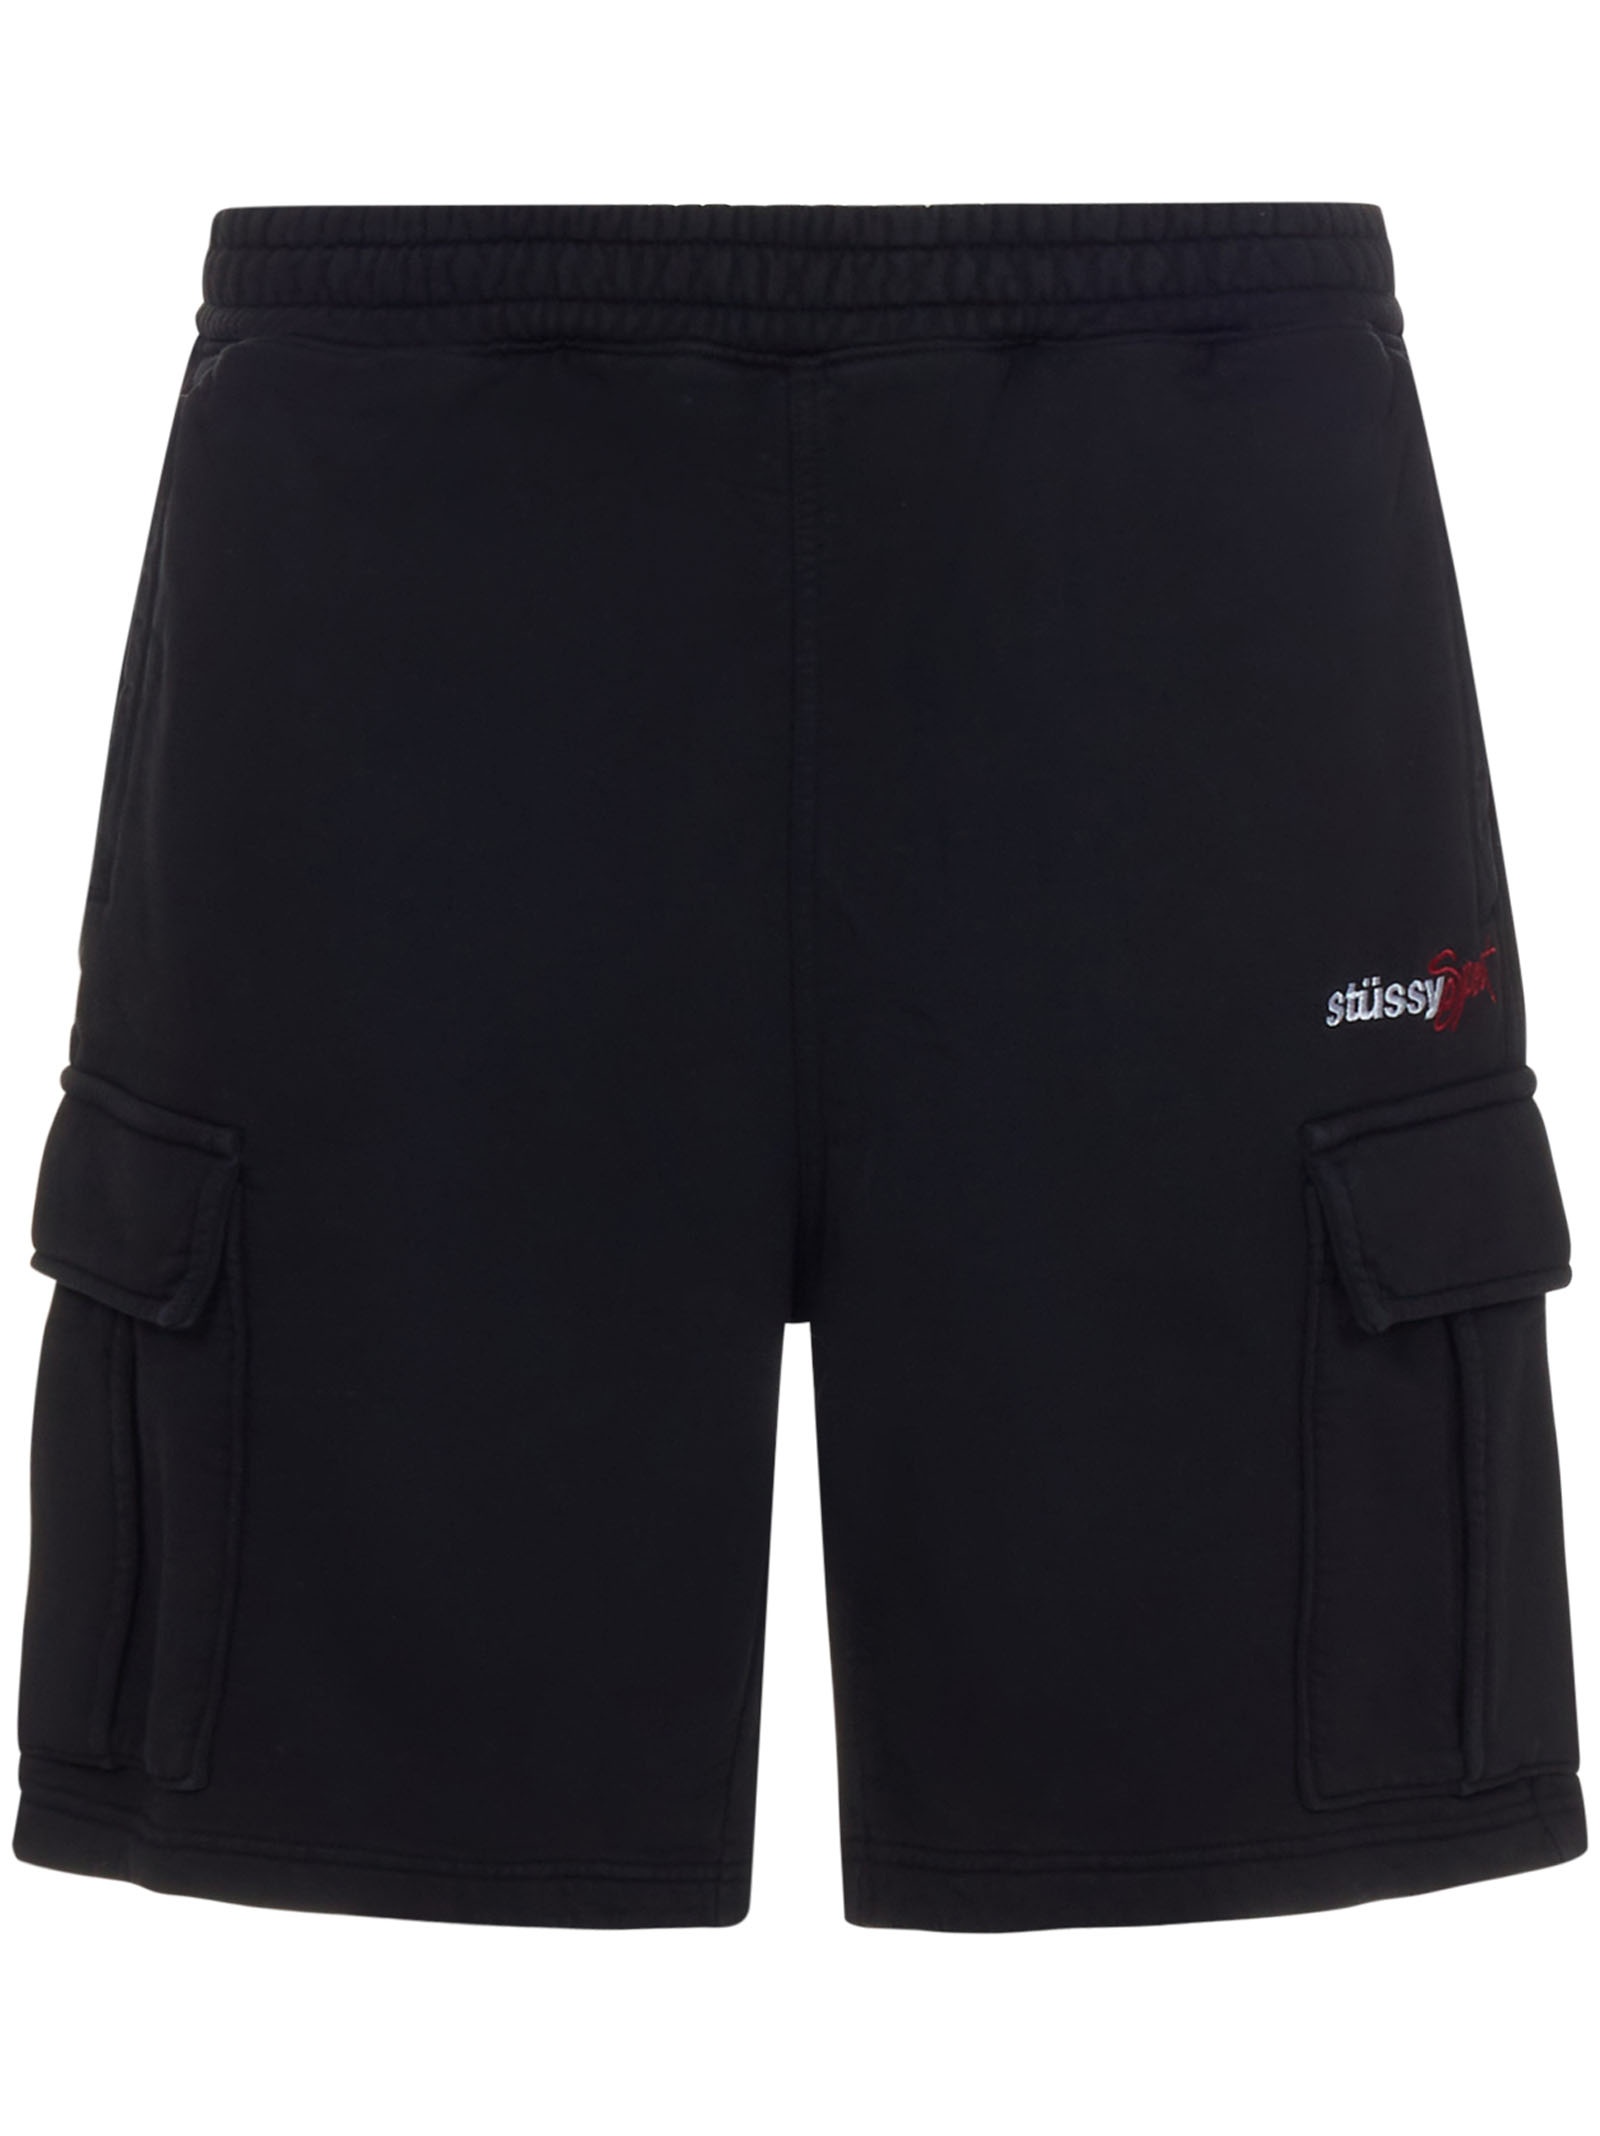 Sports cargo shorts in black cotton with contrasting logo embroidery on the left leg. - 1